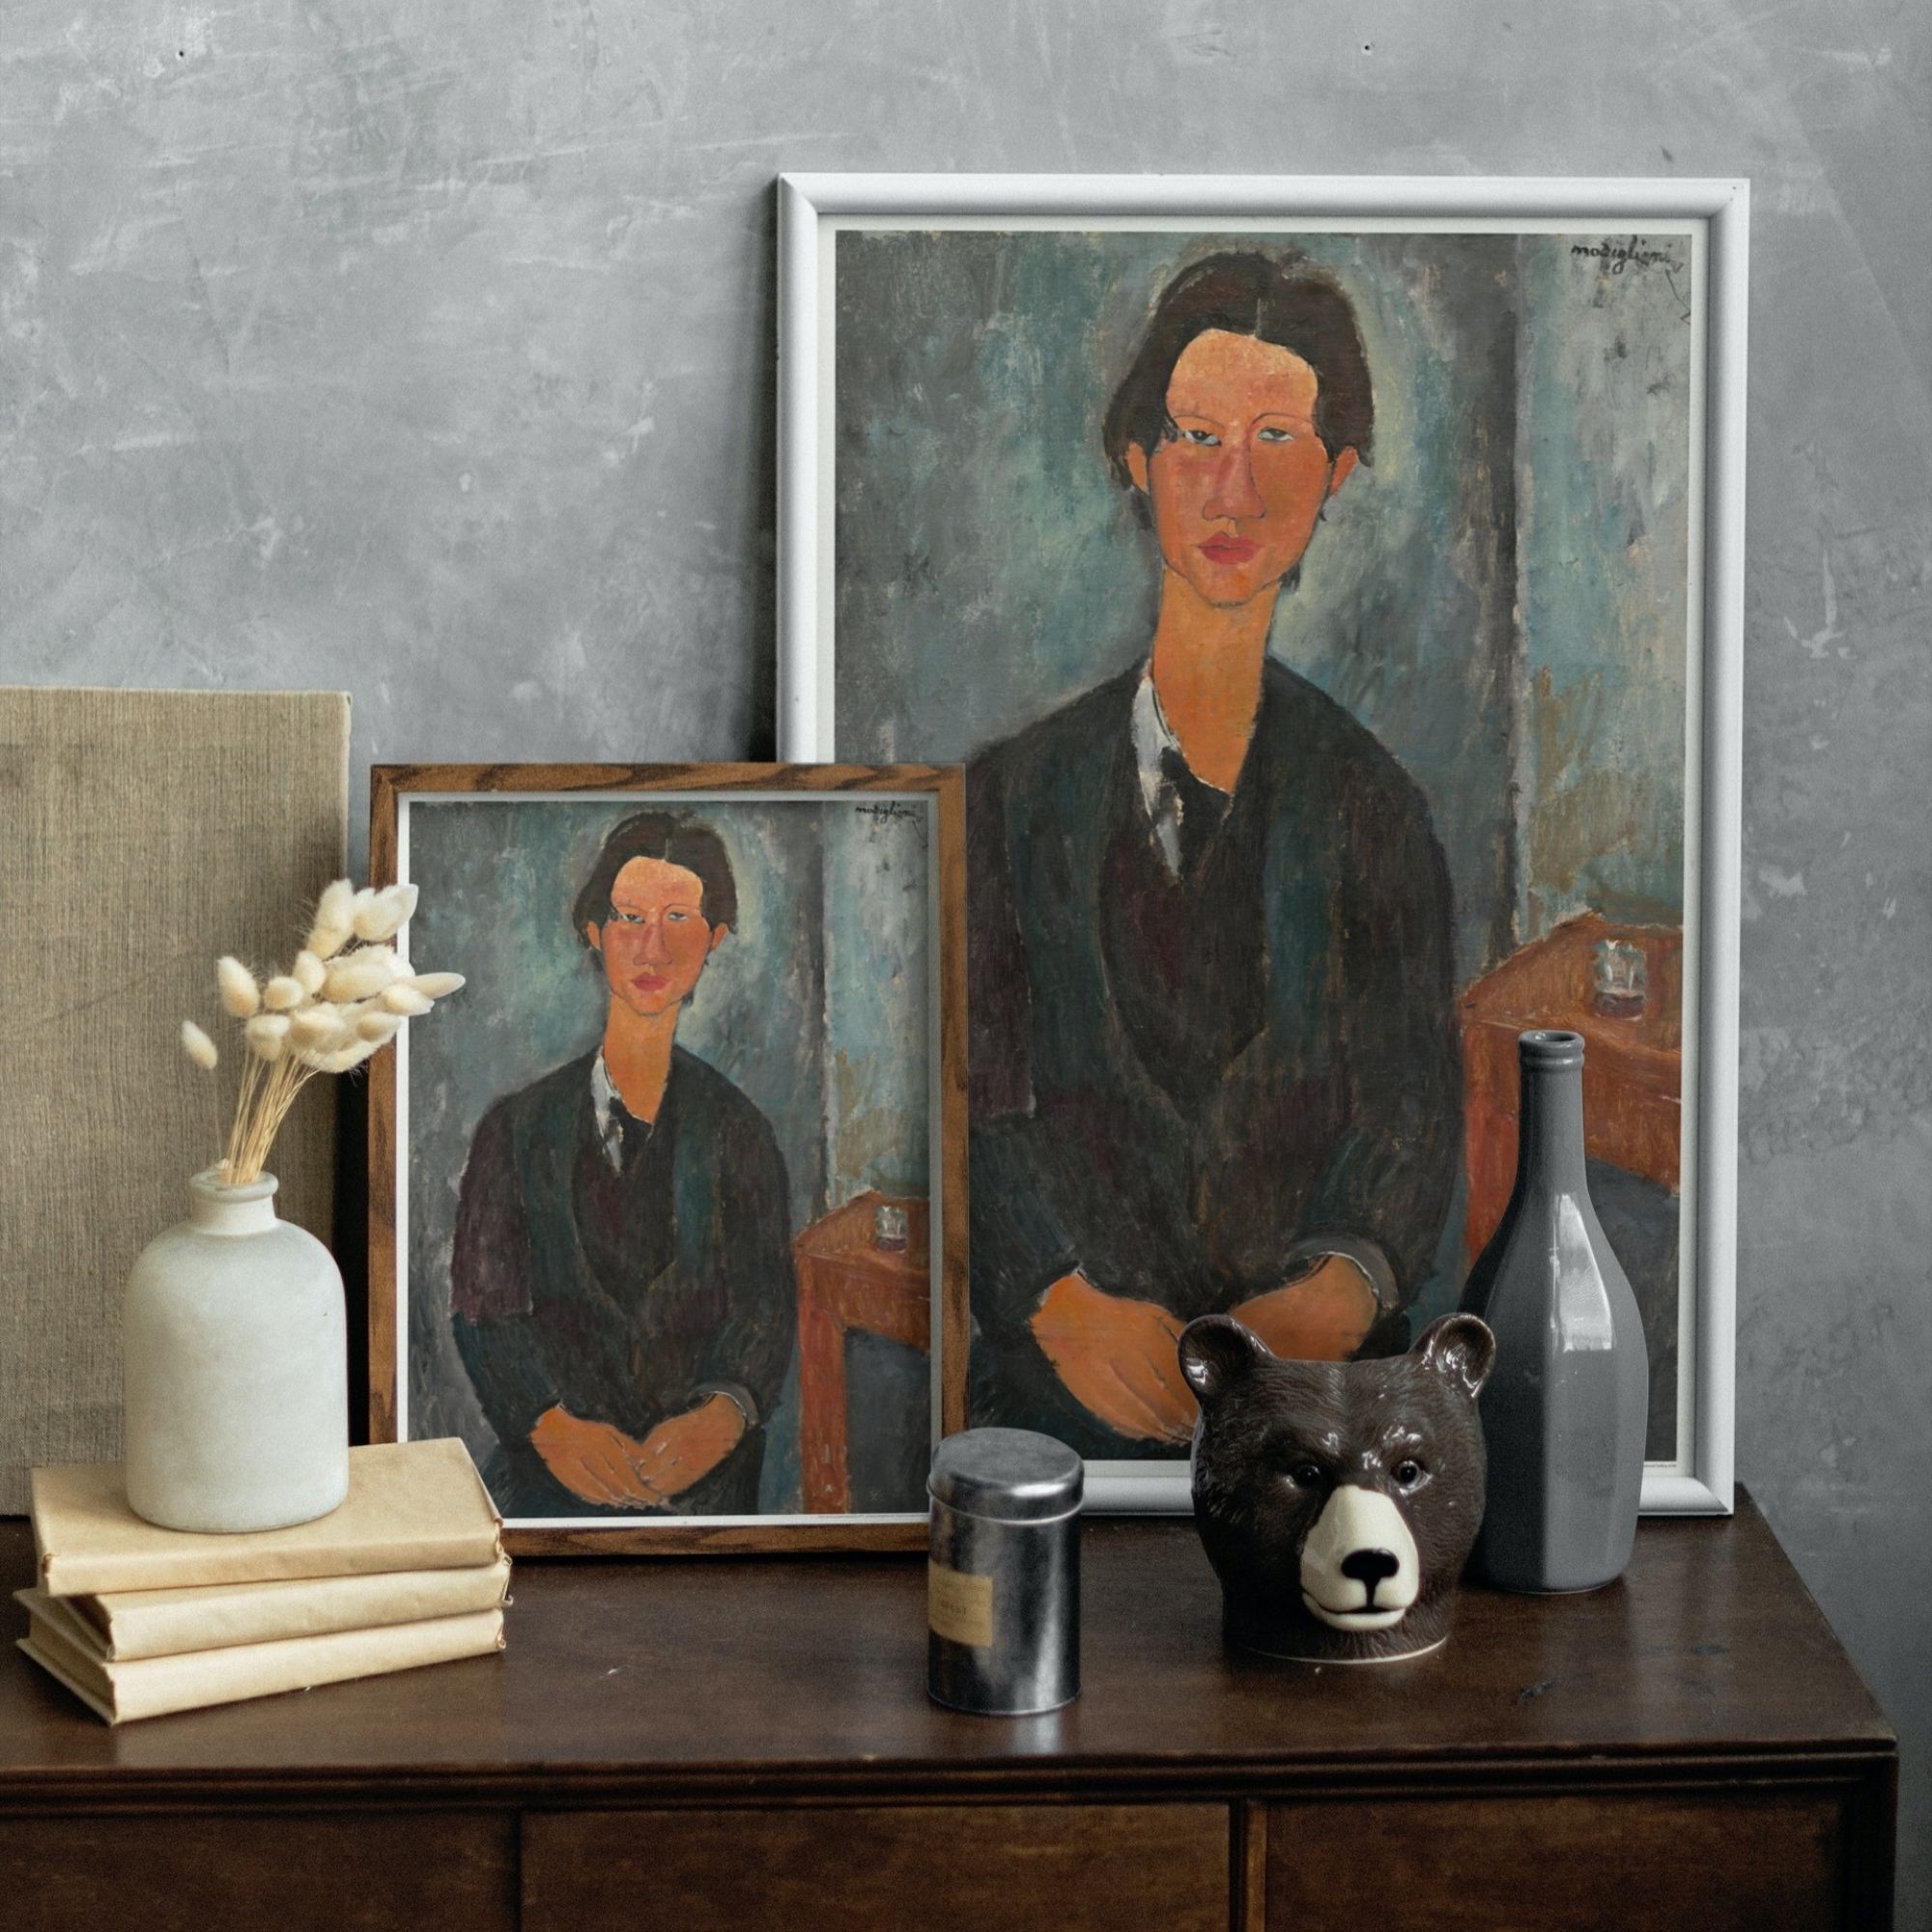 Portrait of Chaim Soutine by Amedeo Modigliani, displaying a figure with the artist's signature stylized and elongated form. The subject, Soutine, is portrayed with a contemplative gaze, dressed in a dark suit against a textured, neutral background, reflecting Modigliani's distinctive expressionistic style.